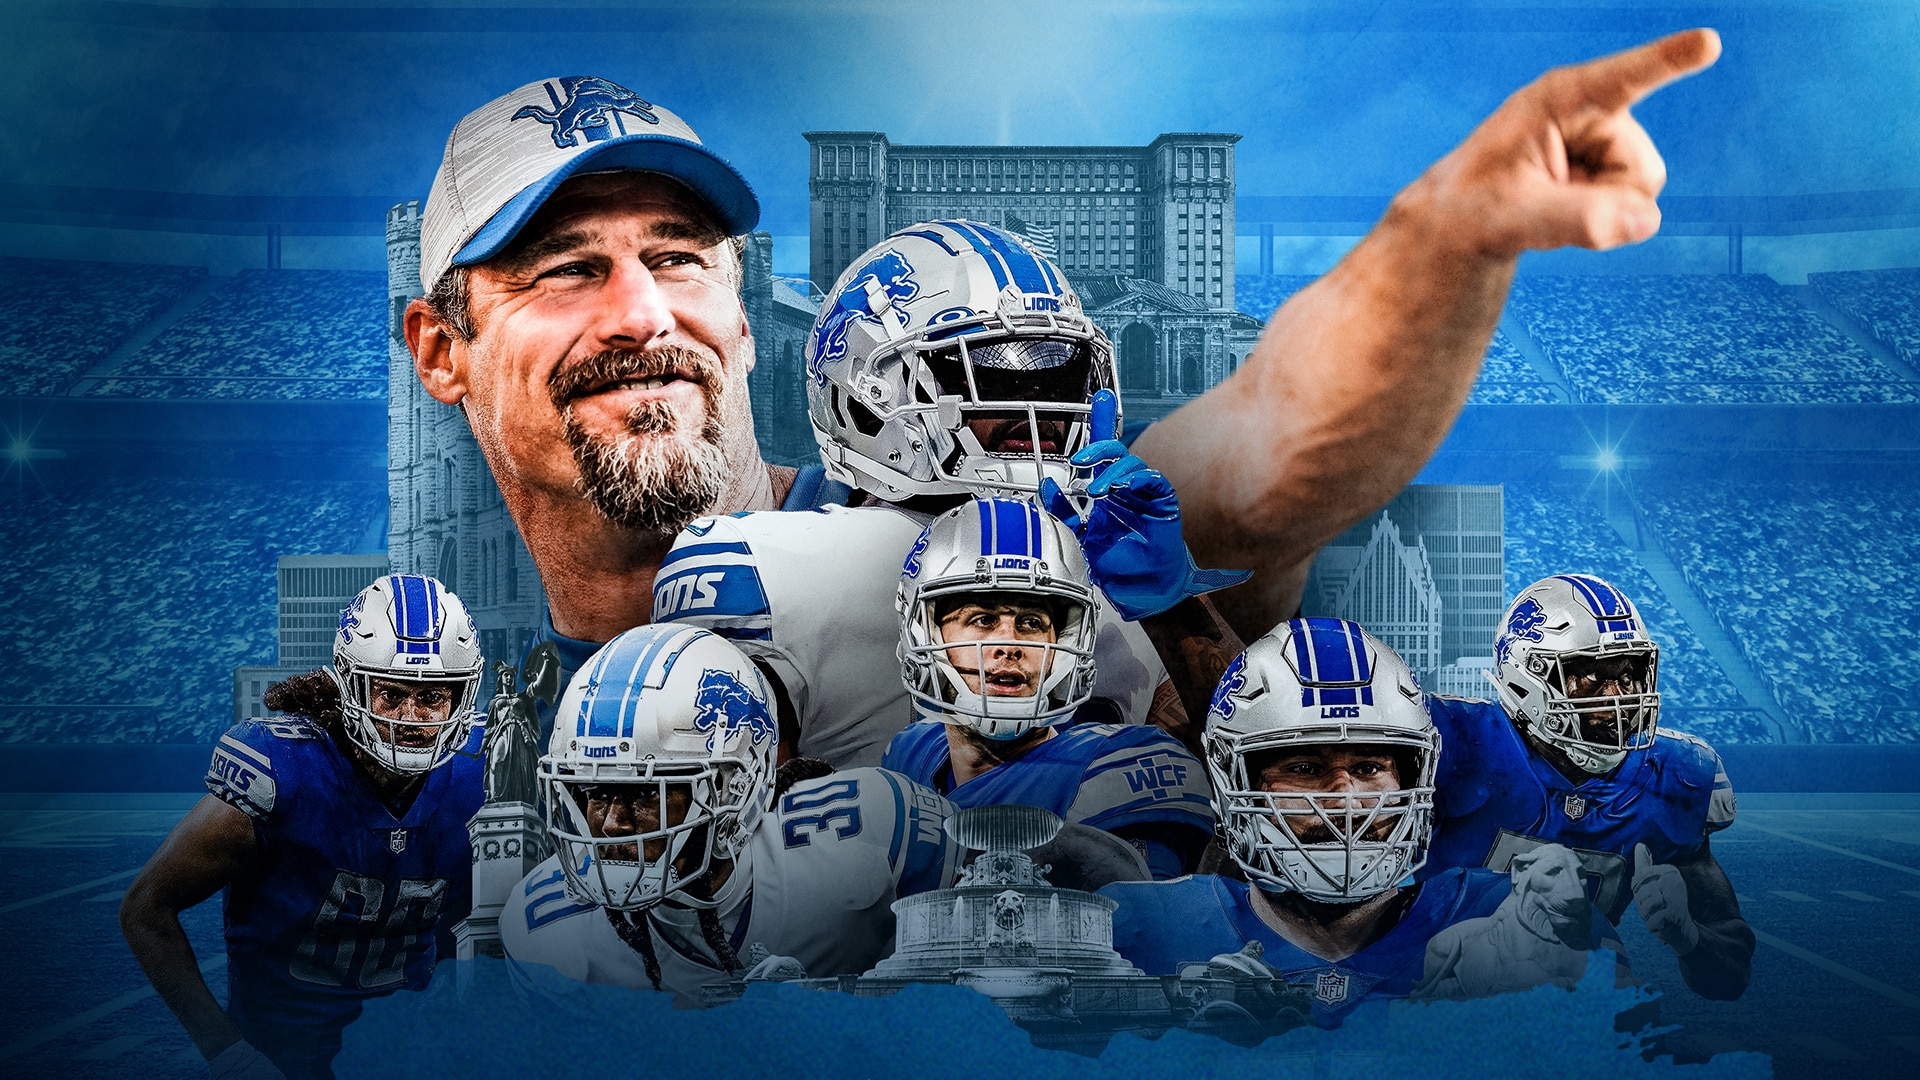 Hard Knocks: Training Camp with the Detroit Lions. Official Website for the HBO Series